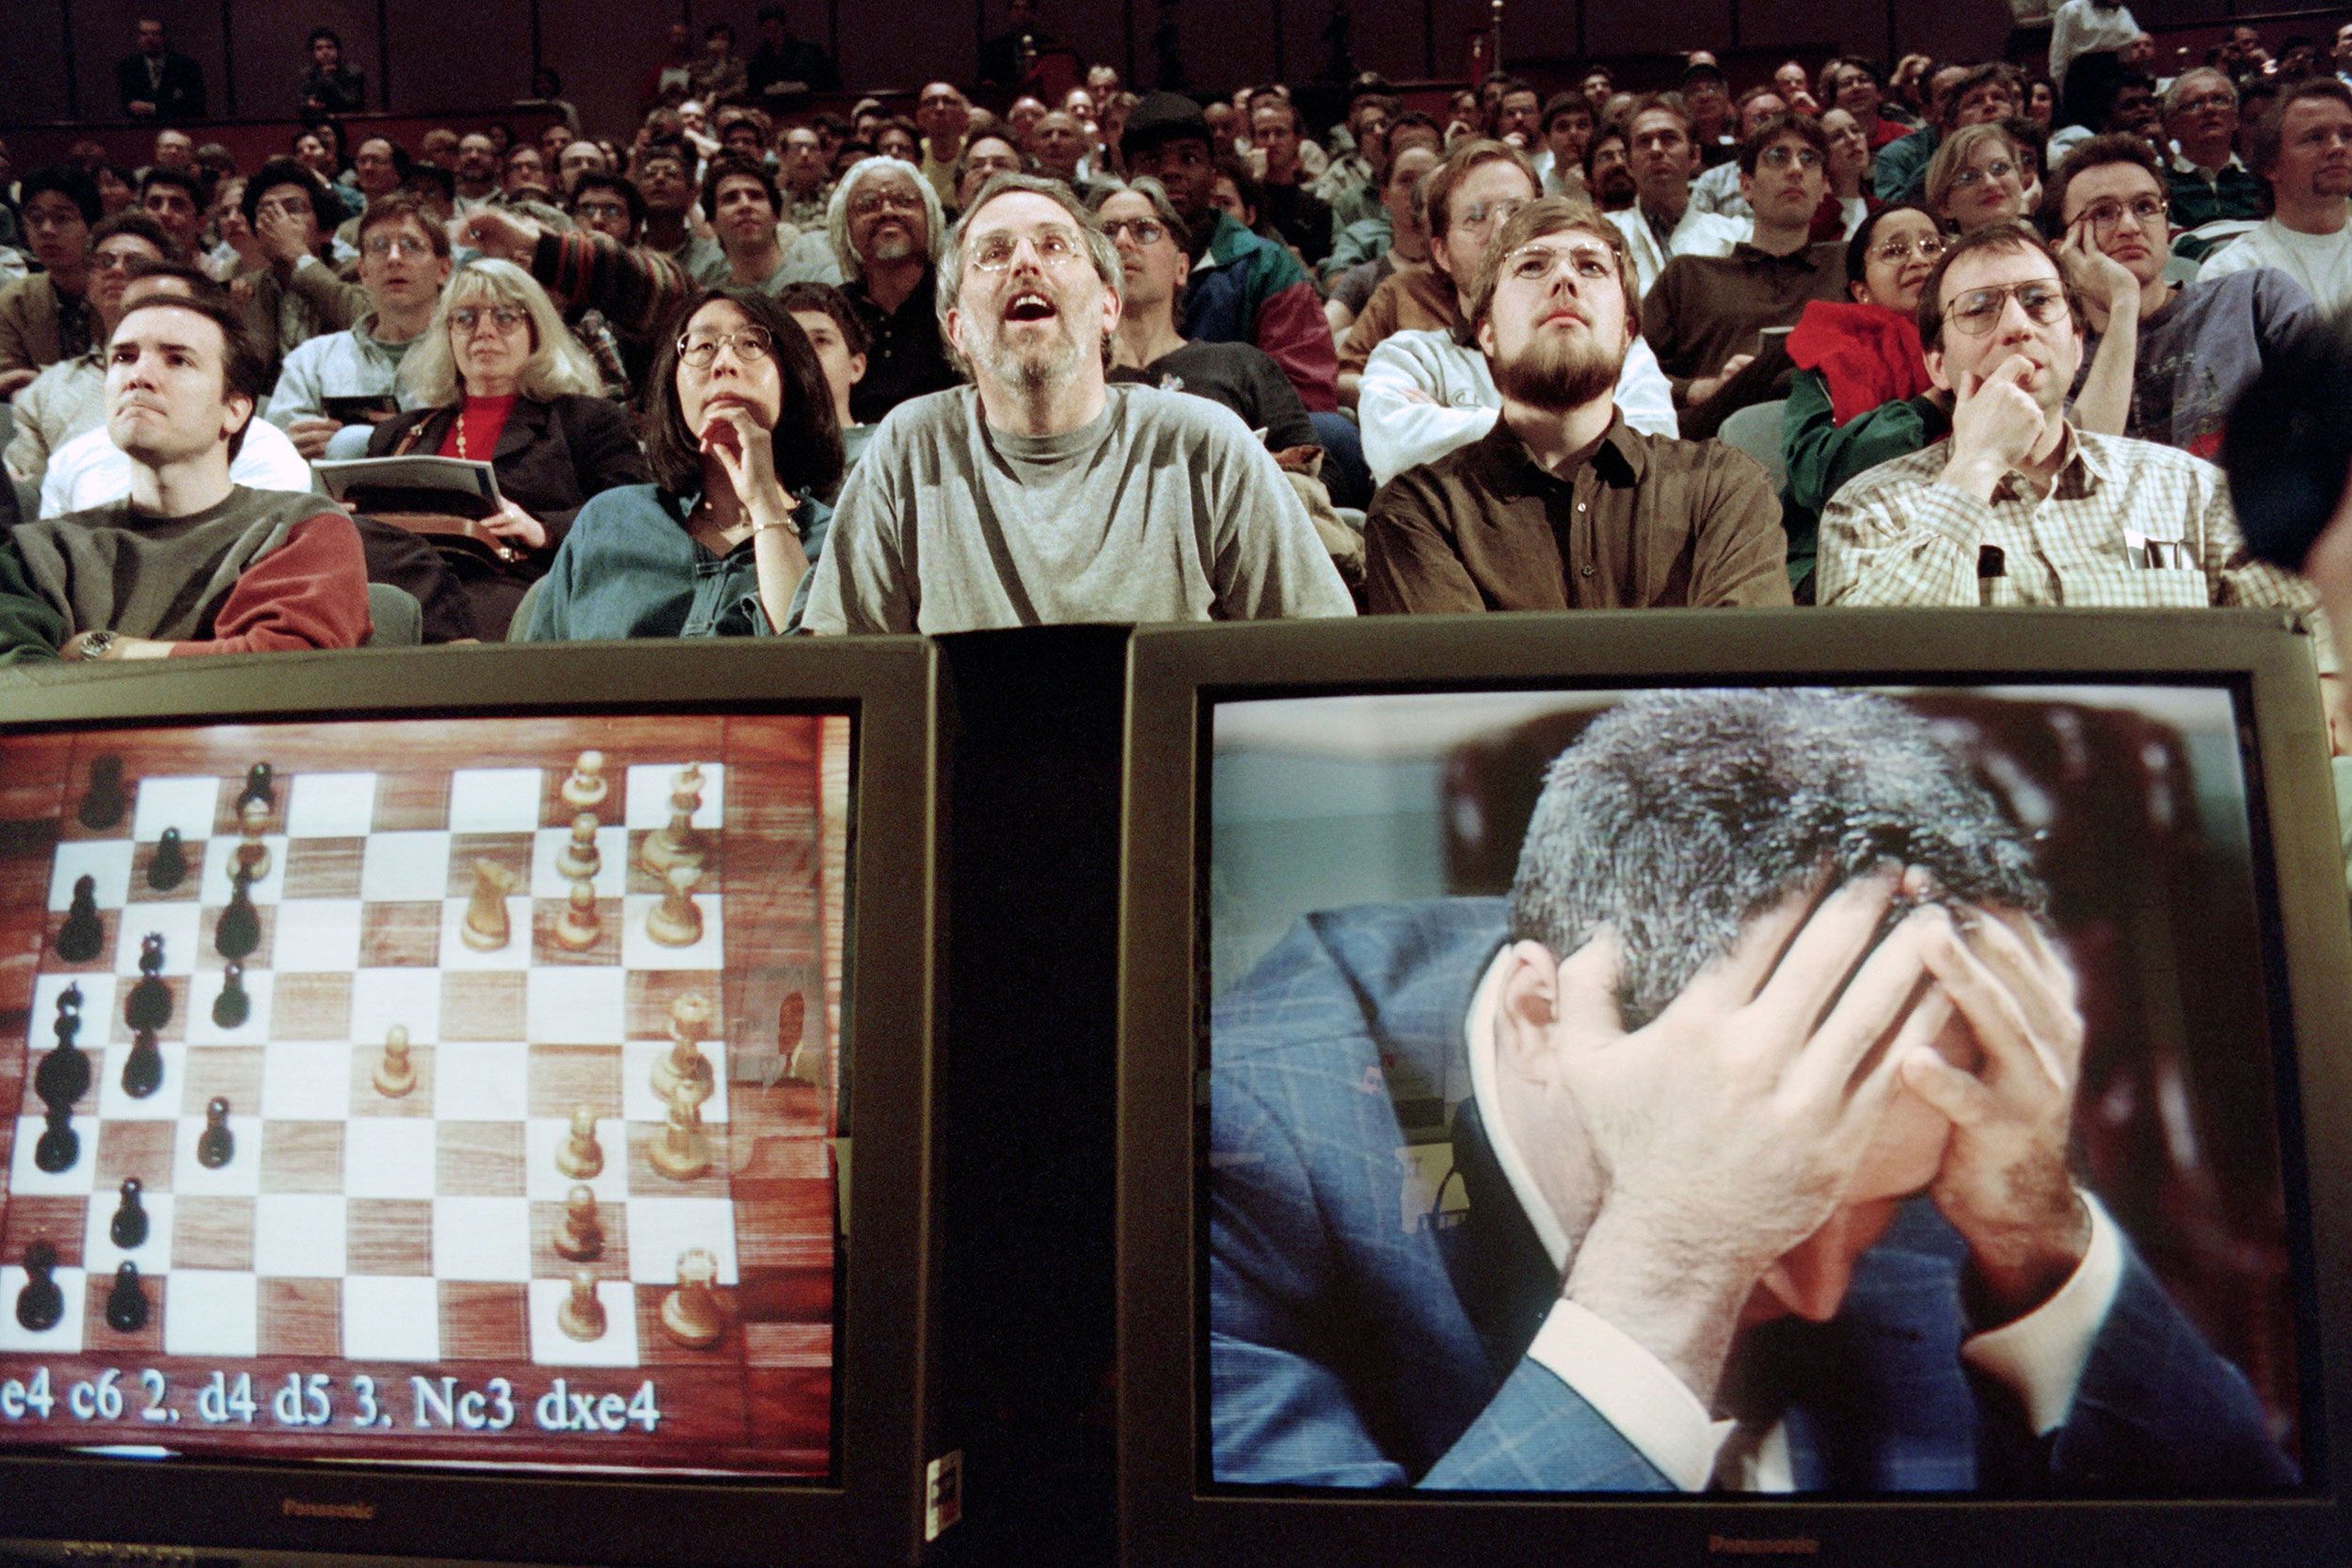 Chess enthusiasts watch World Chess champion Garry Kasparov on a television monitor as he holds his head in his hands at the start of the sixth and final match  May 11, 1997 against IBM's Deep Blue computer in New York. Kasparov lost this match in just 19 moves giving overall victory to Deep Blue with a score of 2.5-3.5.